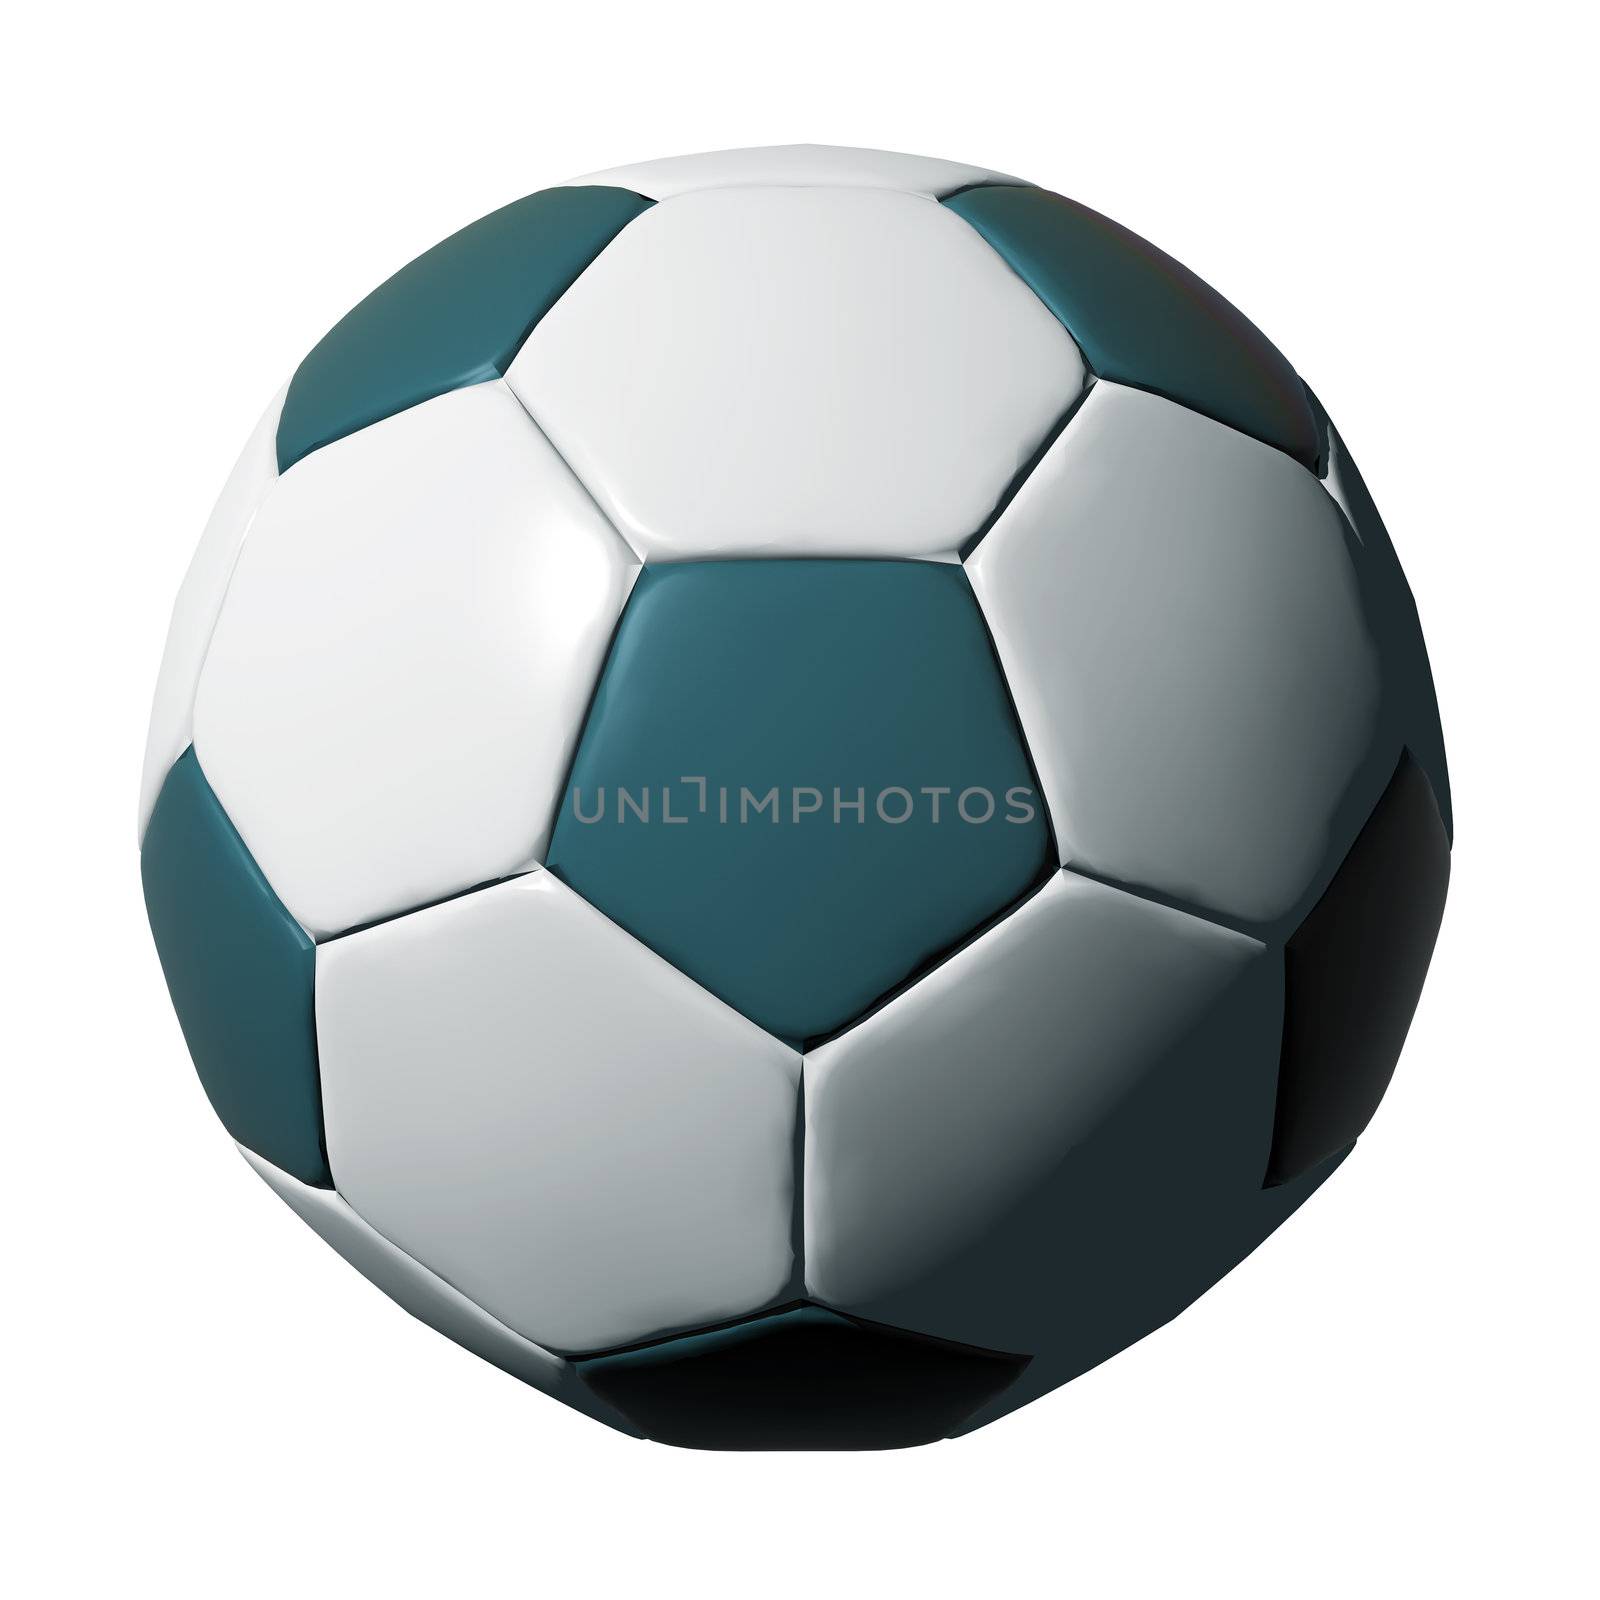 Cyan leather soccer ball isolated on white background.